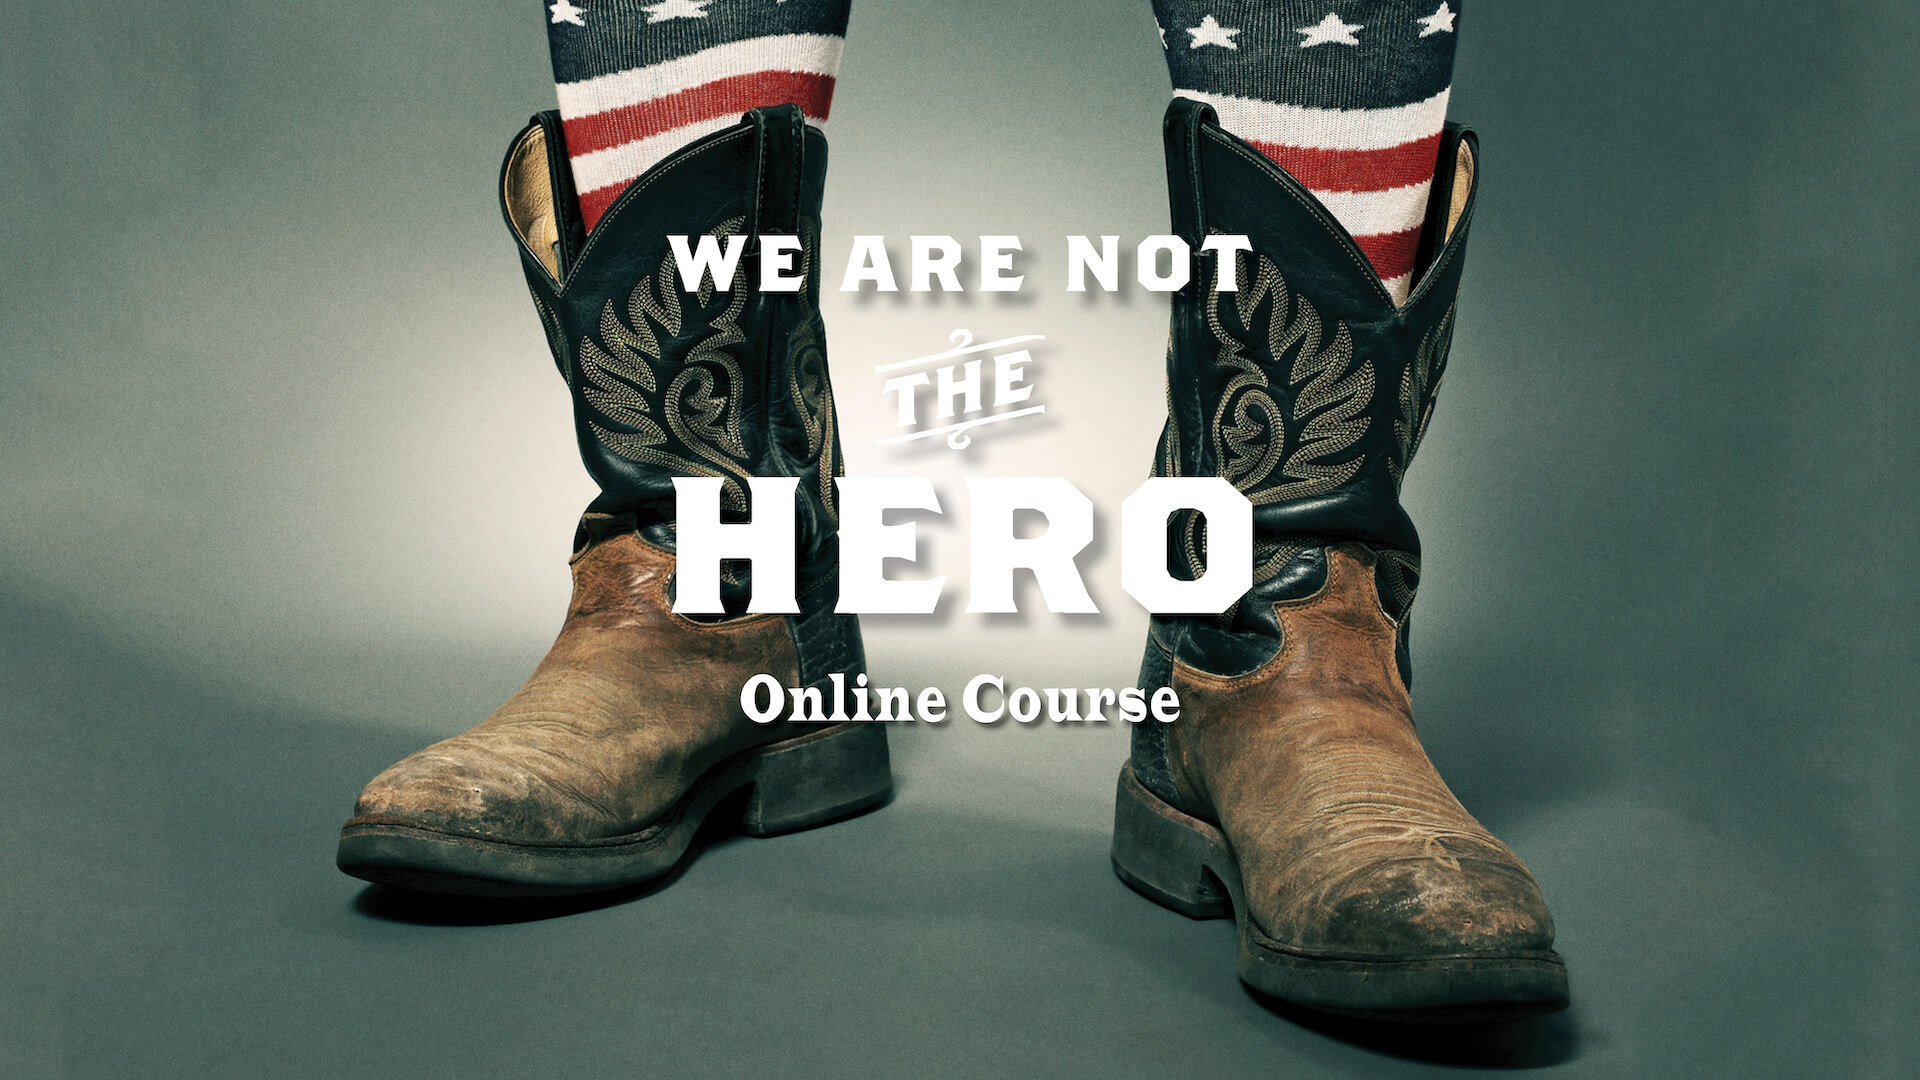 We Are Not the Hero online course